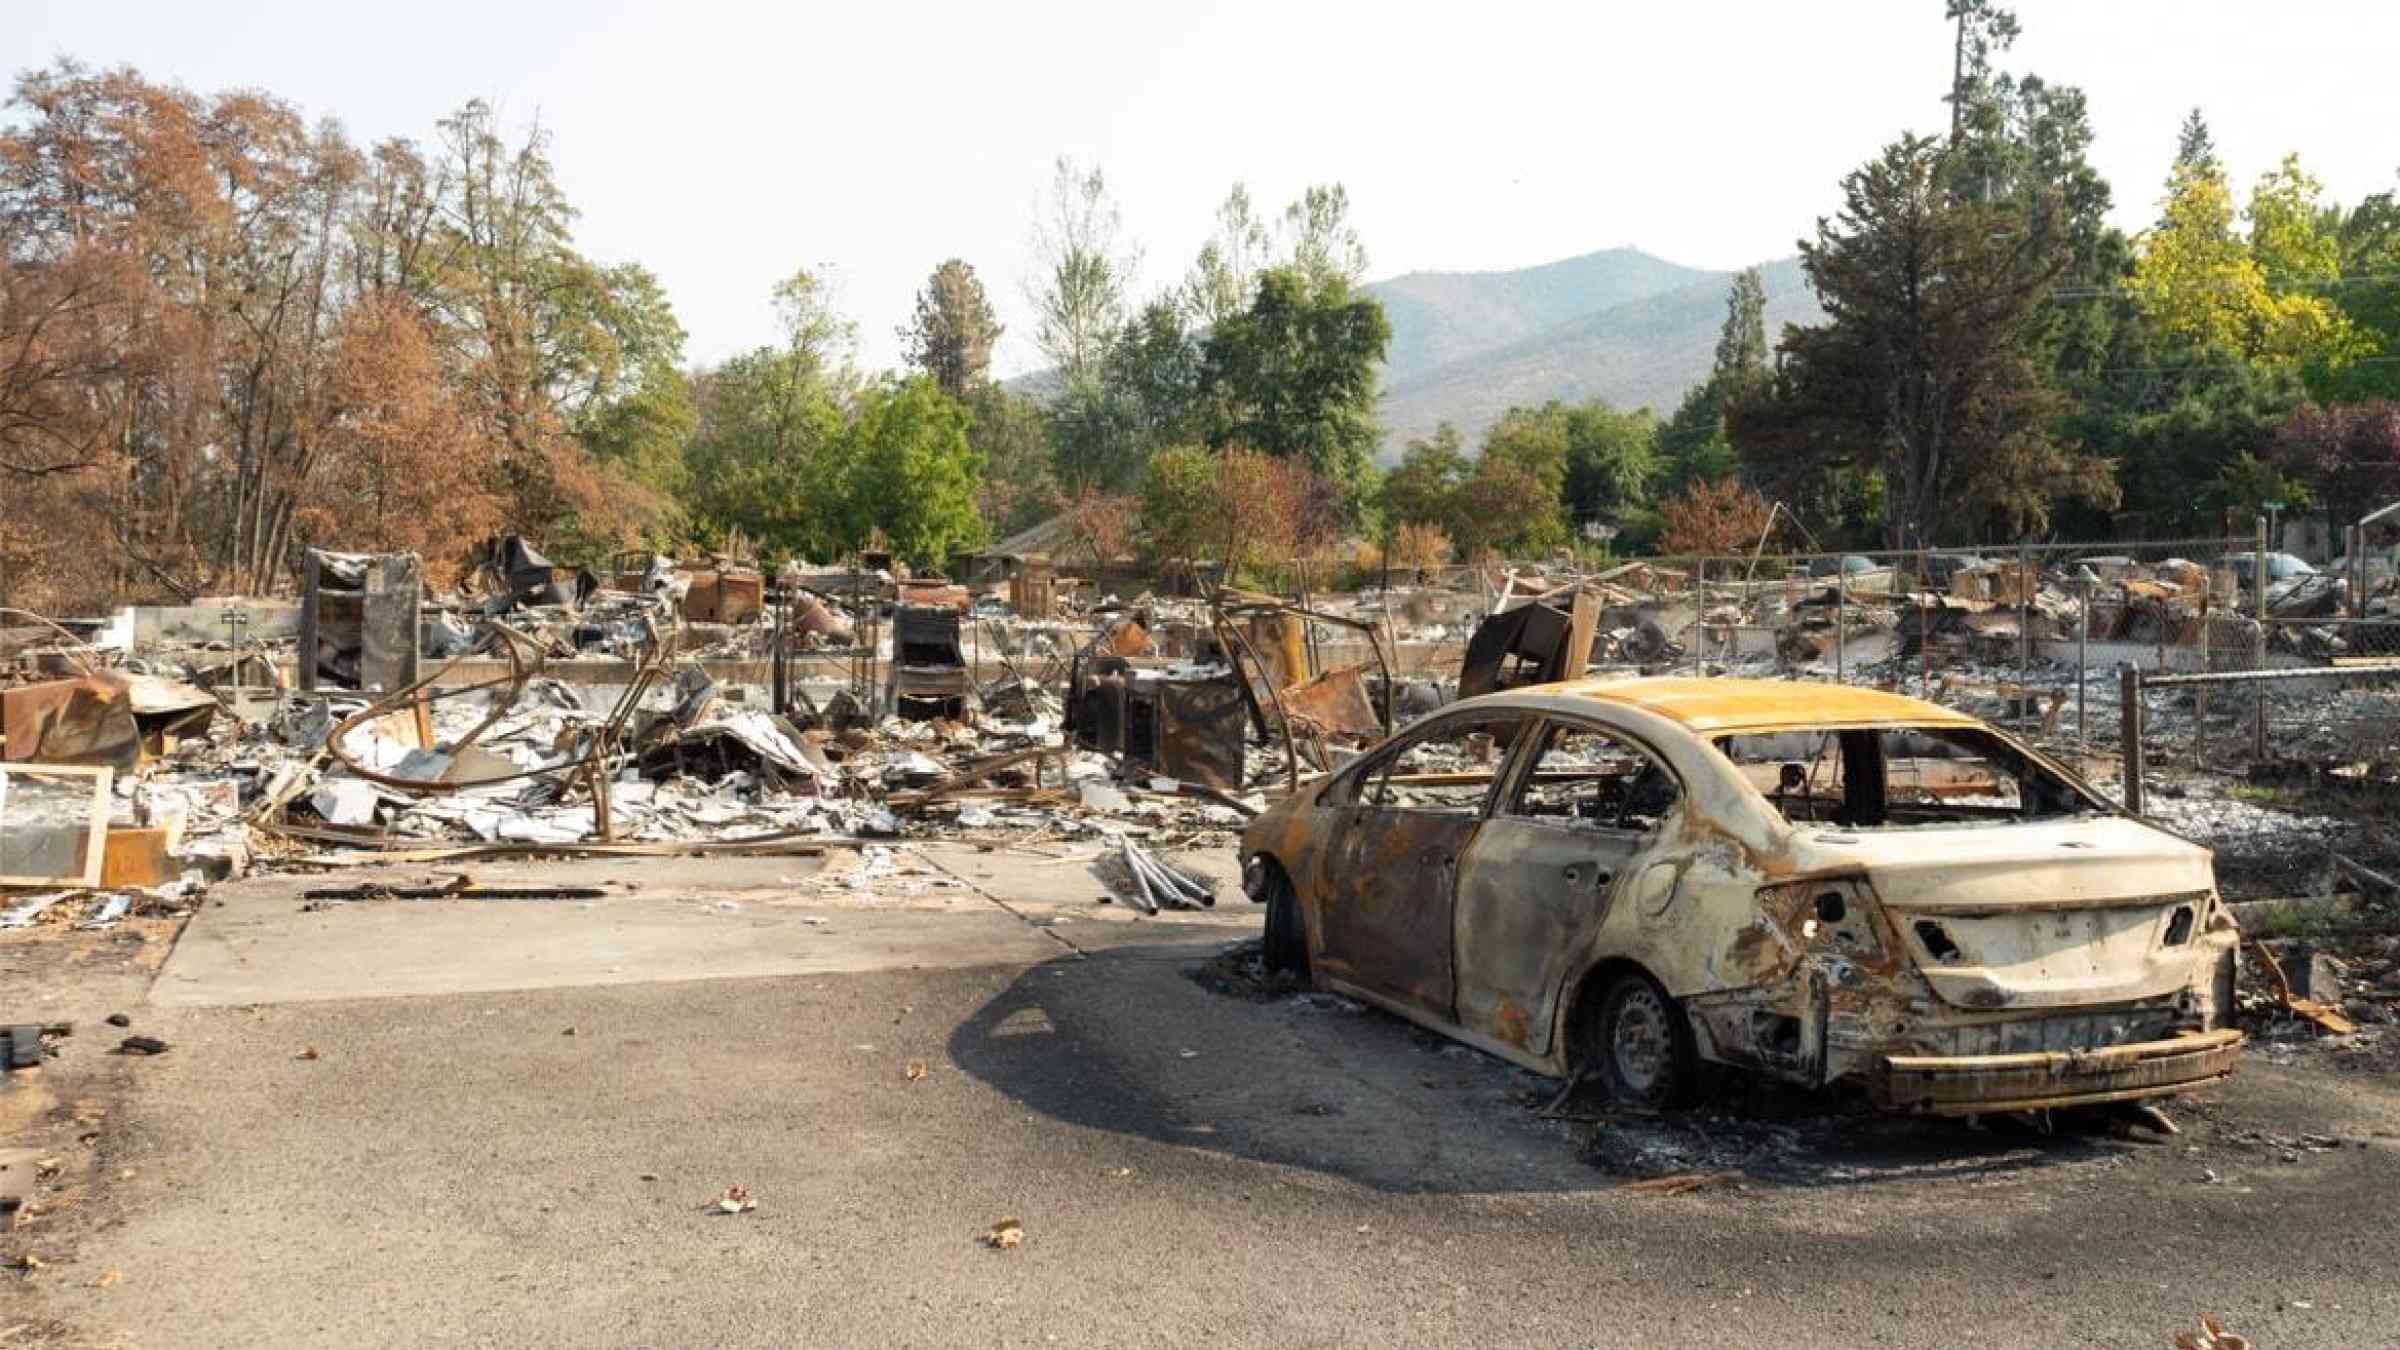 A burned out car sits among the remains of a burned neighborhood from wildfires, healthy vegetation in the background